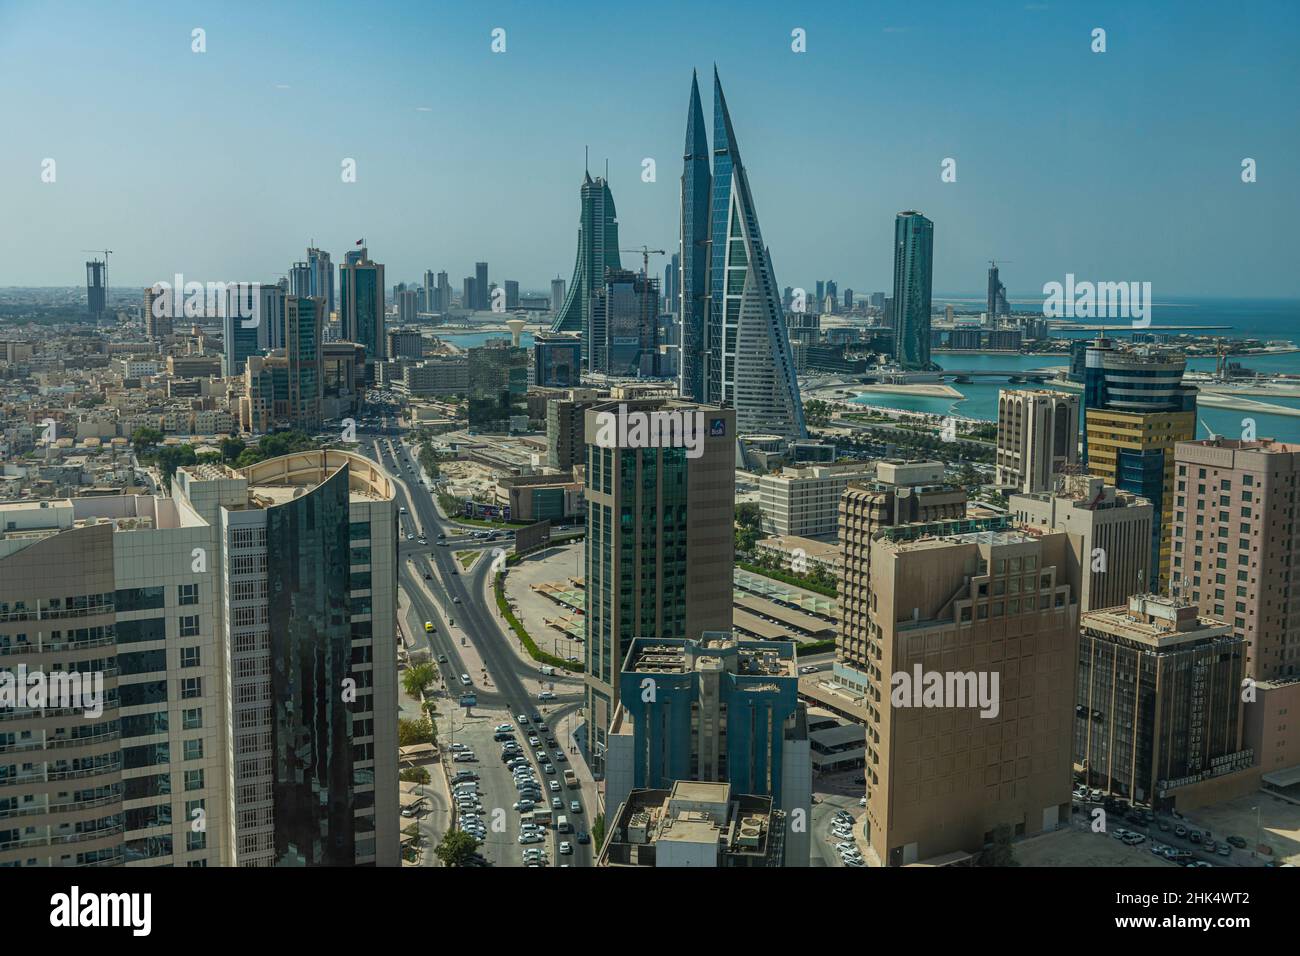 View over the high rise buildings and the United Tower, Manama, Kingdom of Bahrain, Middle East Stock Photo